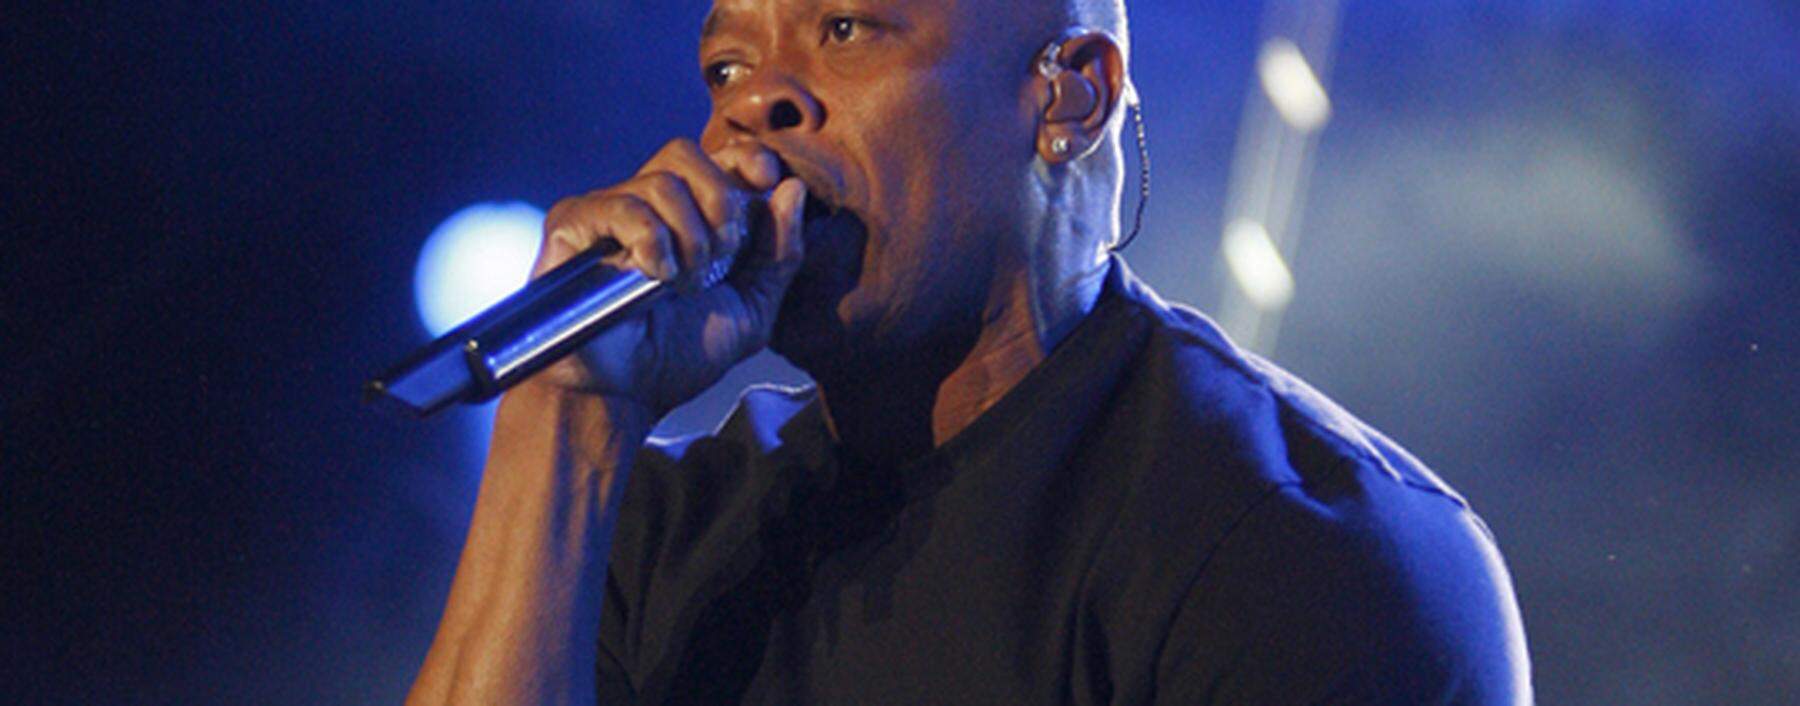 File of Dr. Dre performing at the Coachella Valley Music and Arts Festival in Indio